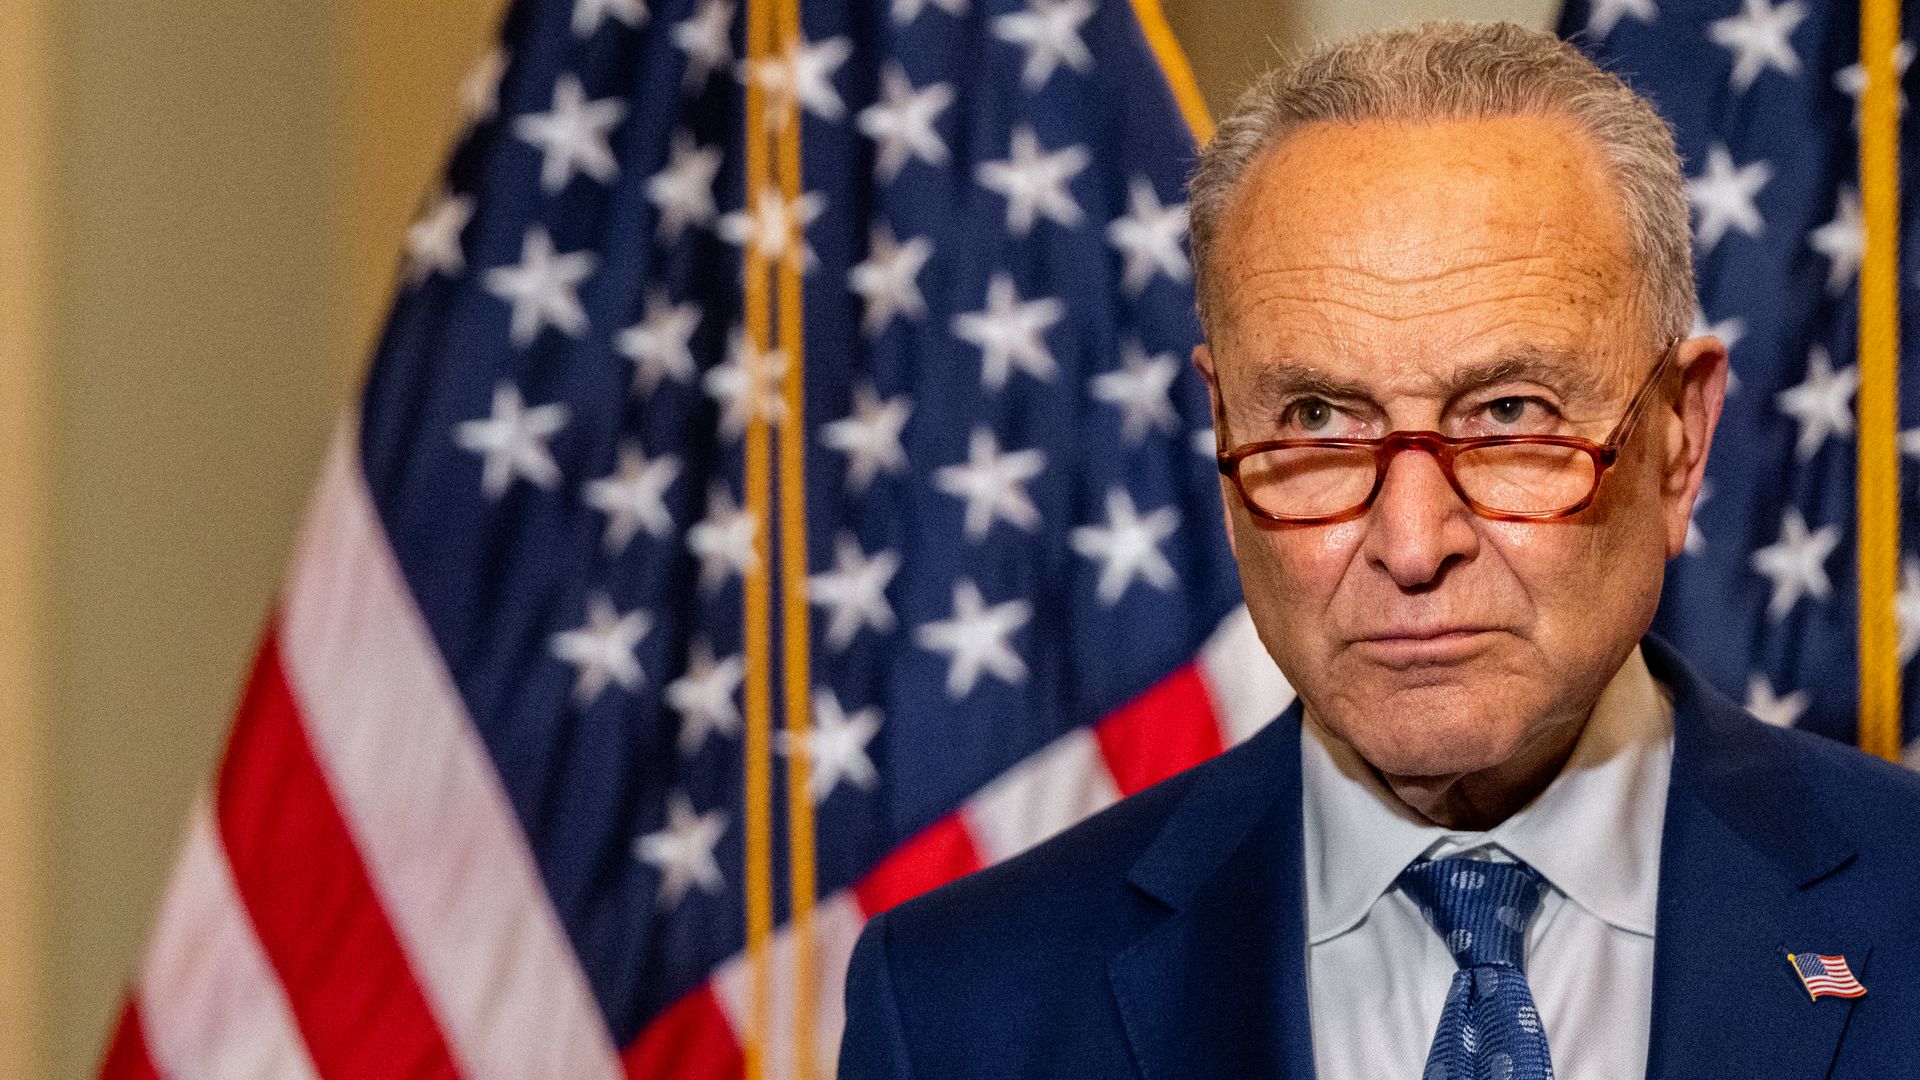 Sen. Majority Leader Chuck Schumer (D-NY) looks on during a news conference after the Senate luncheons in the U.S. Capitol on June 22, 2022 in Washington, DC. 